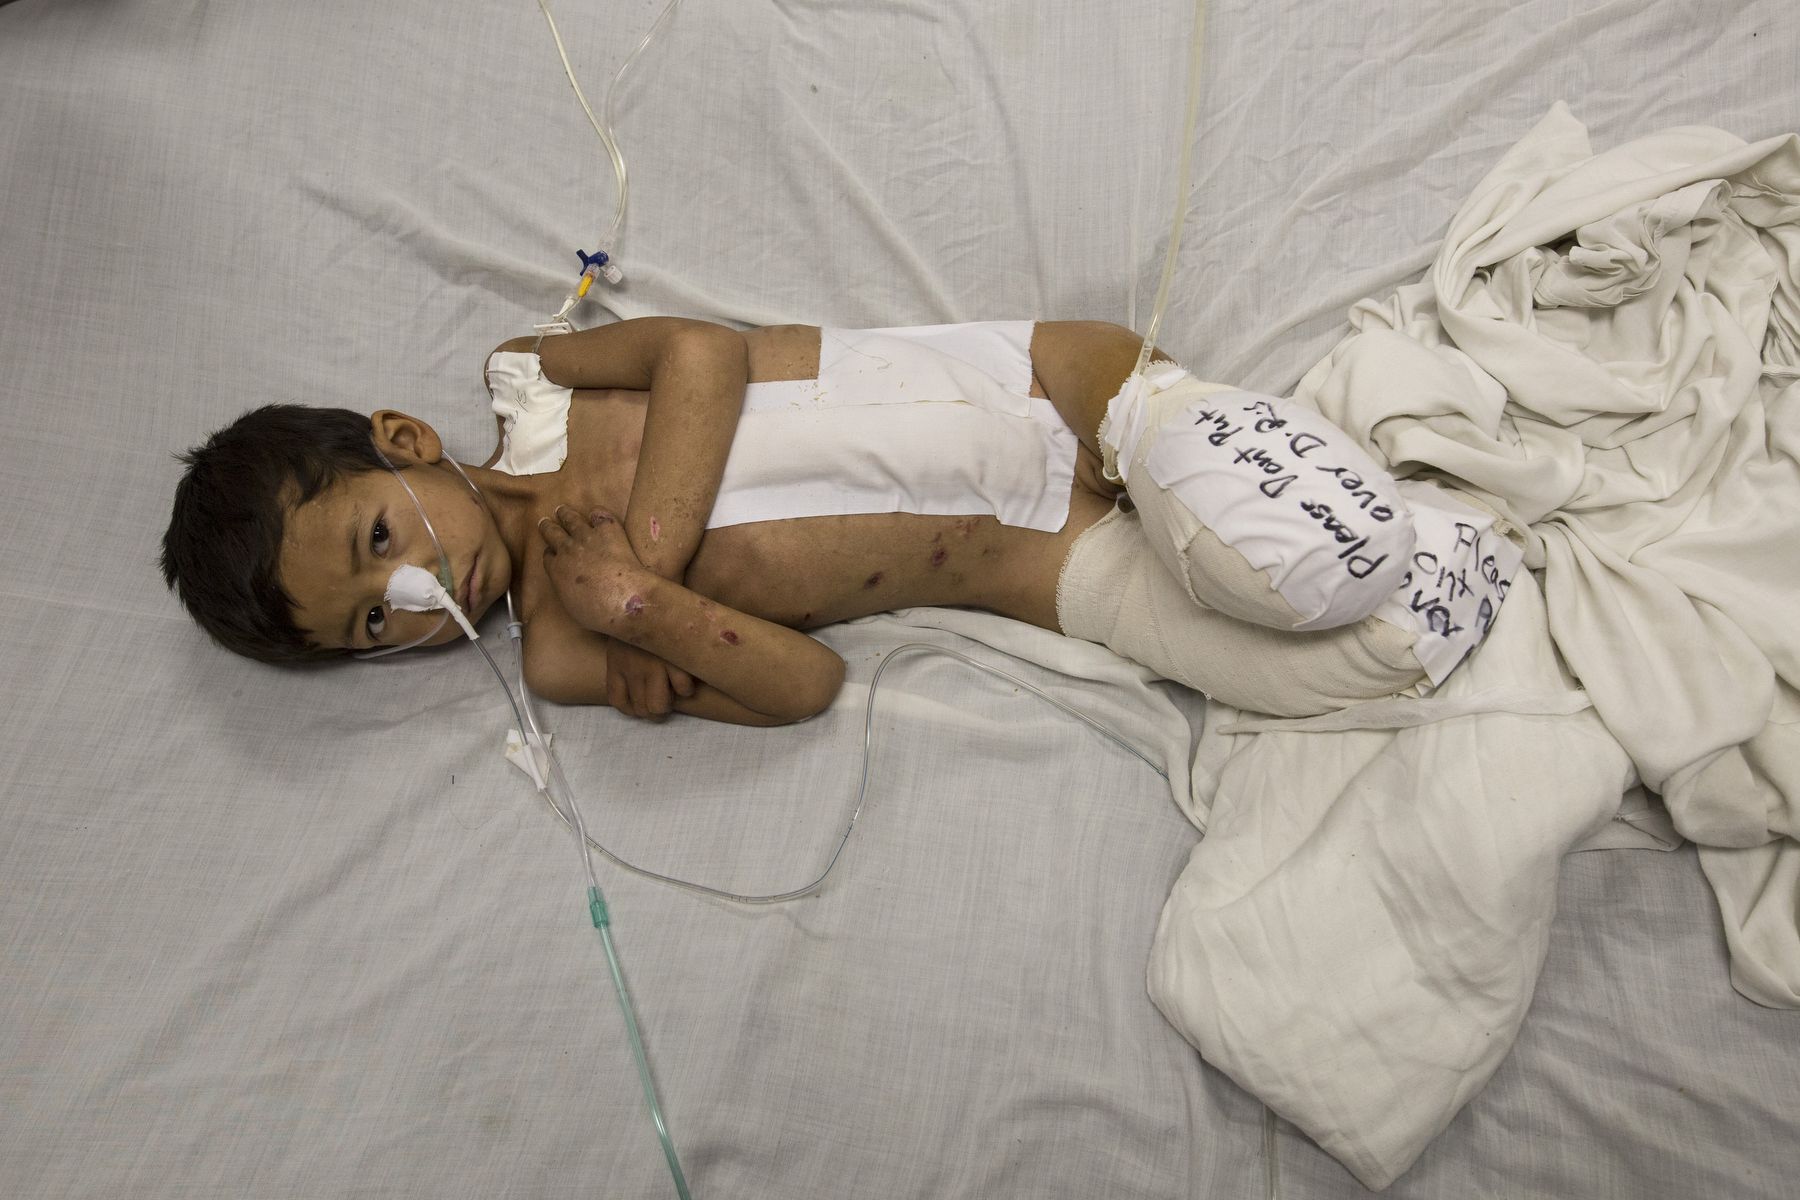 Kabir, 5, from Faryab lays in bed at the Emergency hospital in Kabul on April 3, 2016. He is a victim of a rocket attack, lost both of his legs along with his sister and brother who were also killed. Image by Paula Brontstein. Afghanistan, 2016.